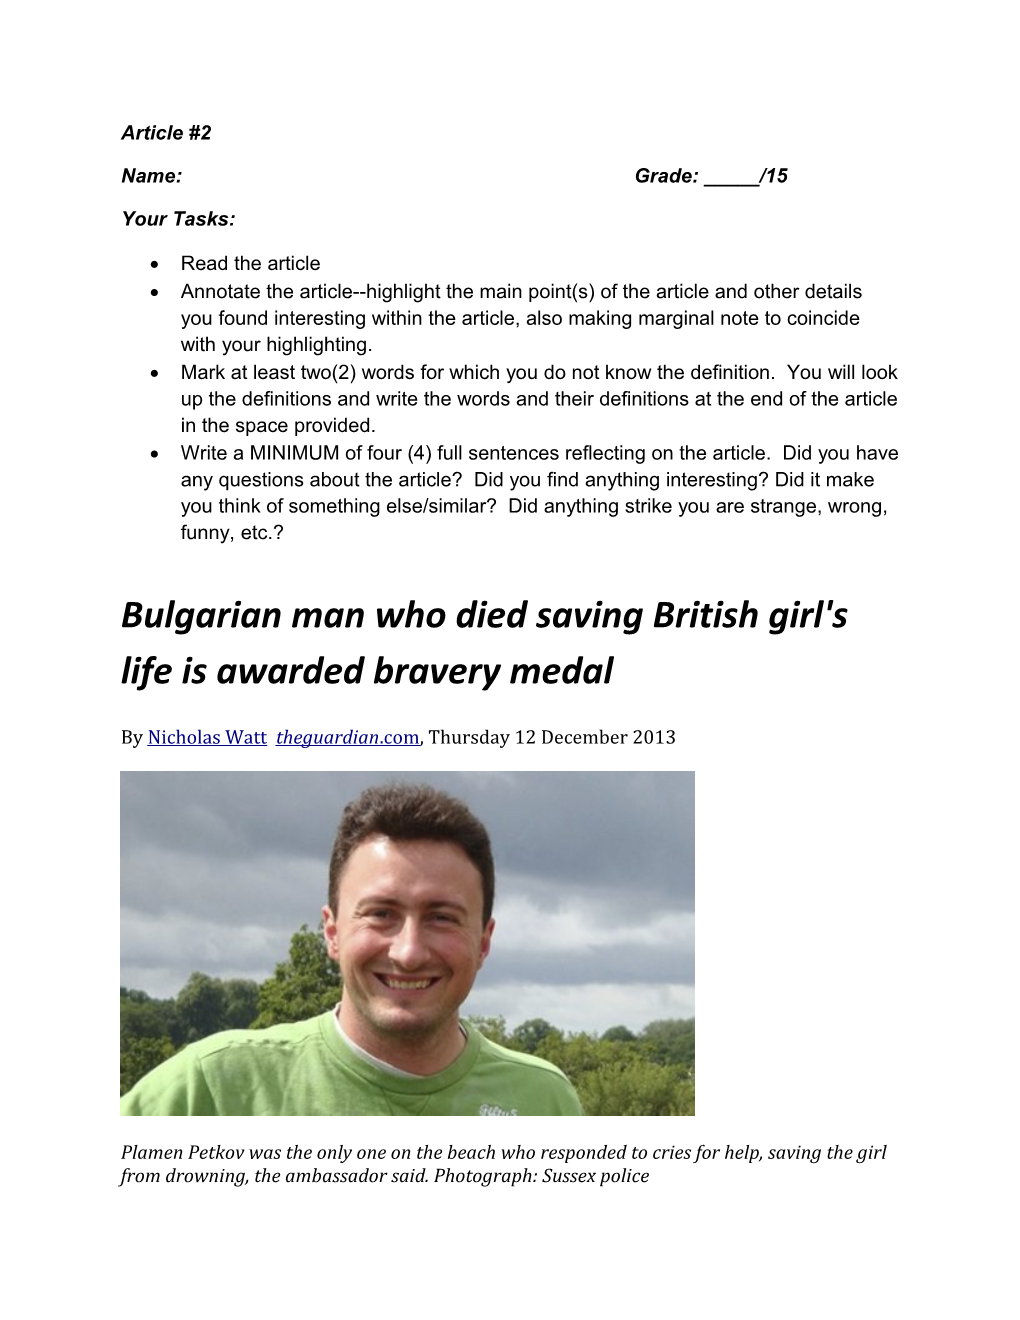 Bulgarian Man Who Died Saving British Girl's Life Is Awarded Bravery Medal